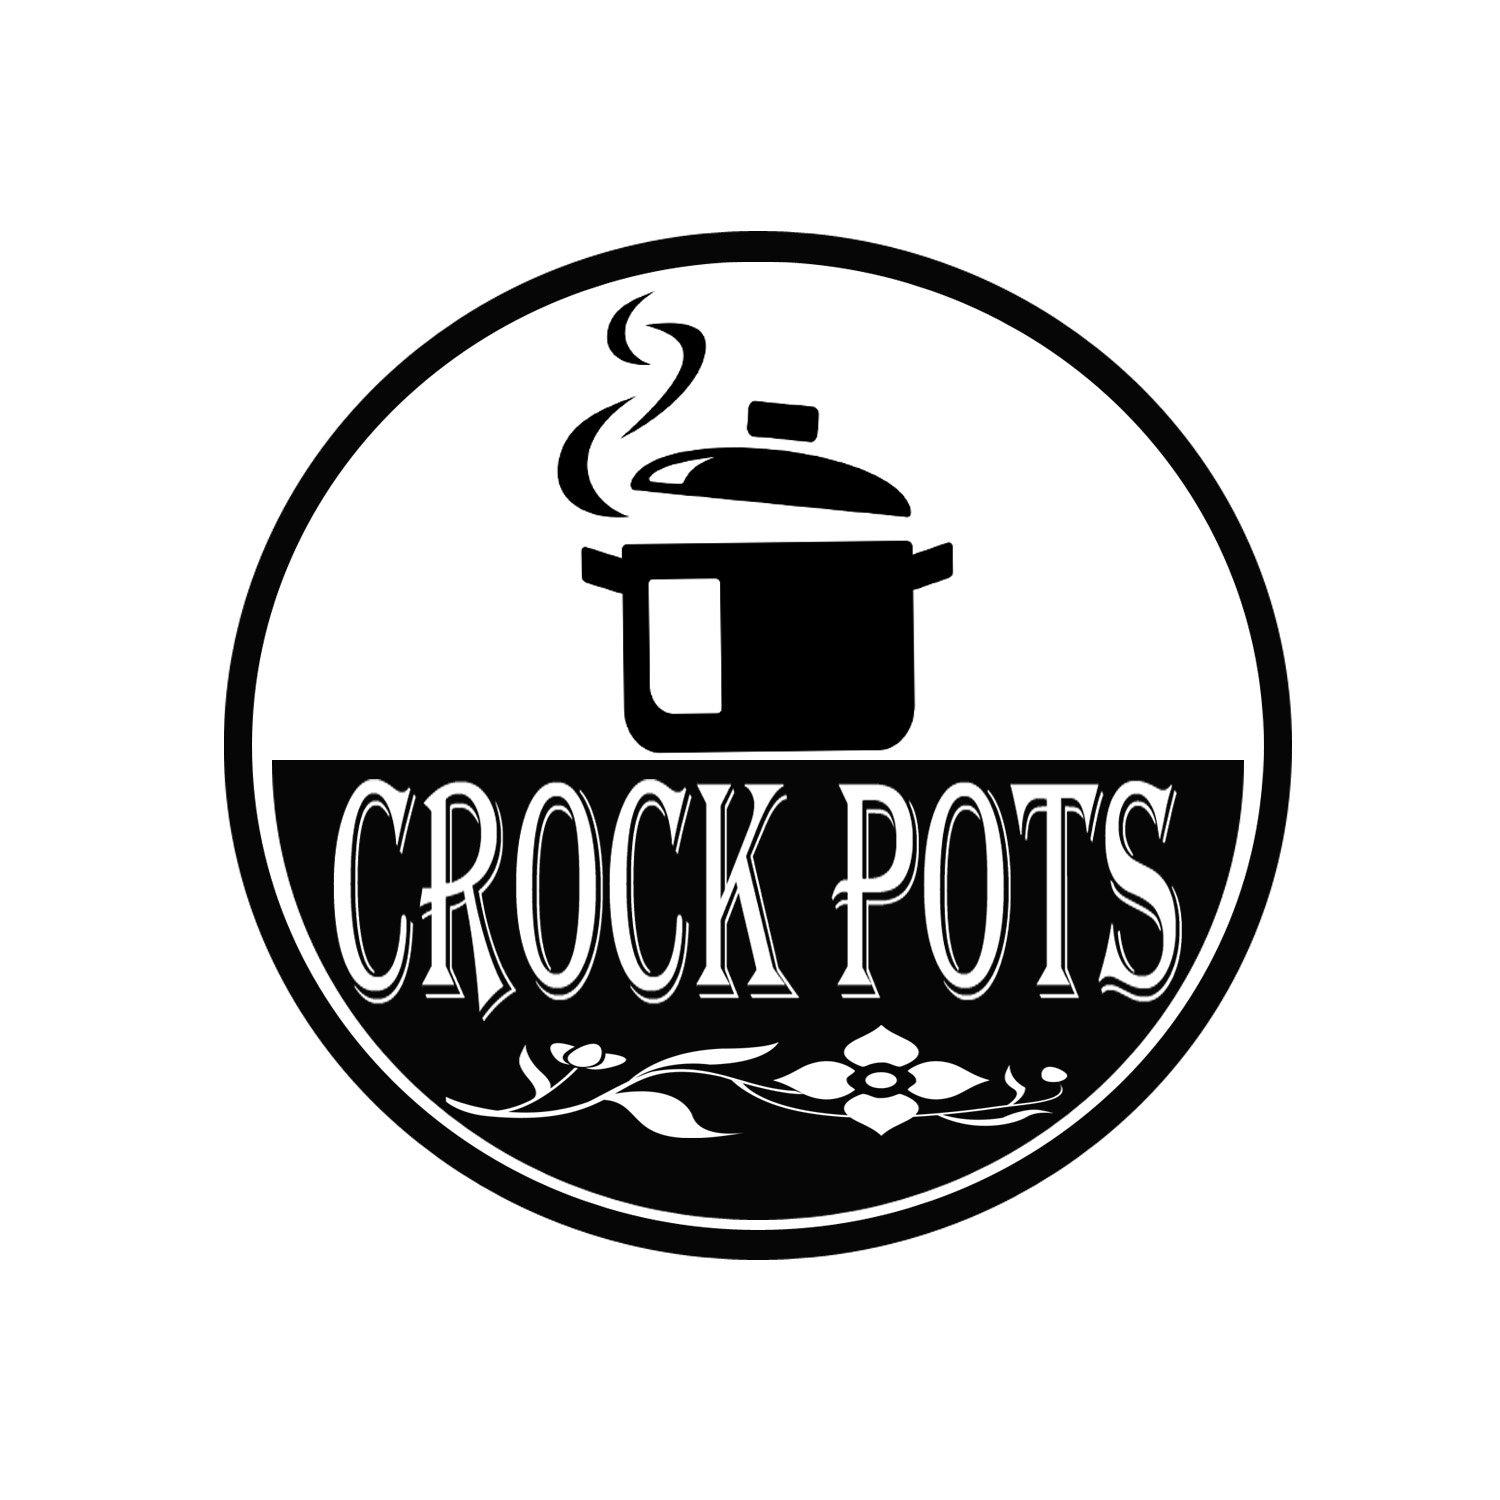 Crockpots is a new take on fast, healthy take-out food to bring the family back to the table at dinner.
Why go through a fast food drive thru when you can grab